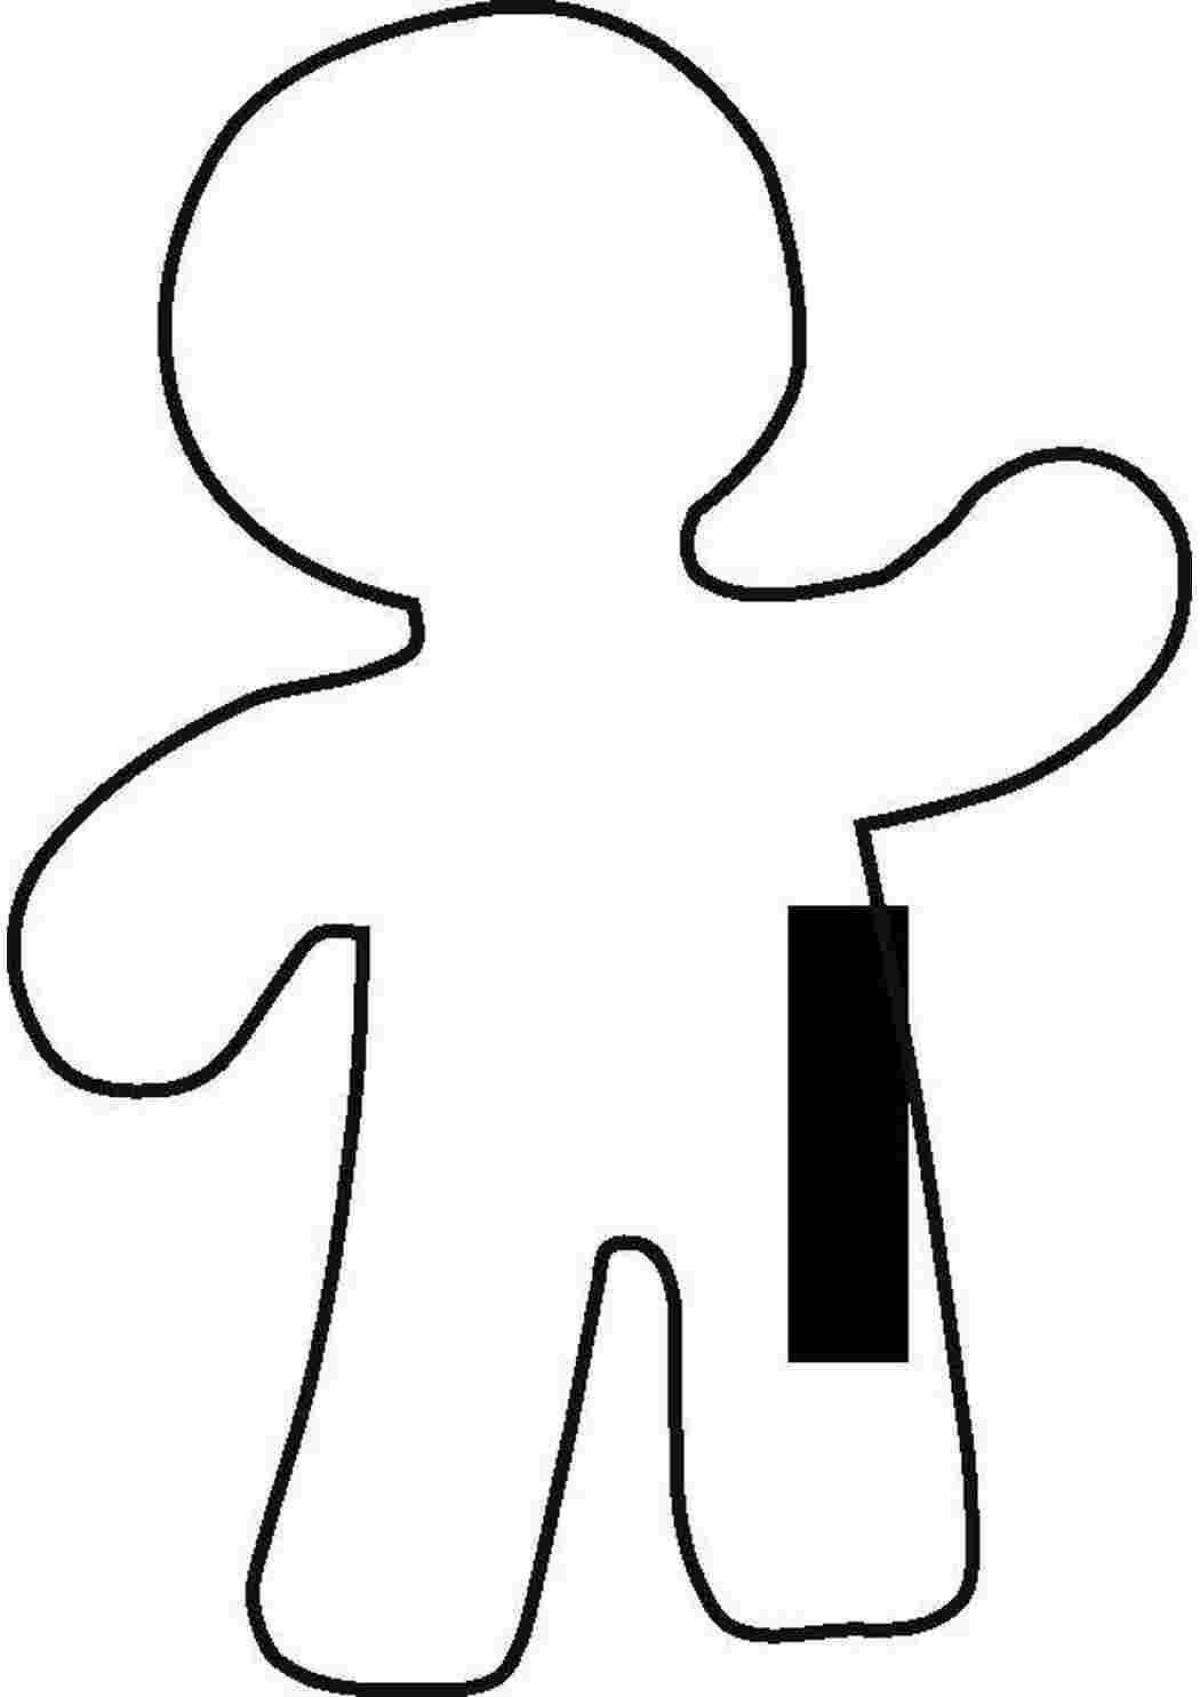 Radiant coloring page man outline